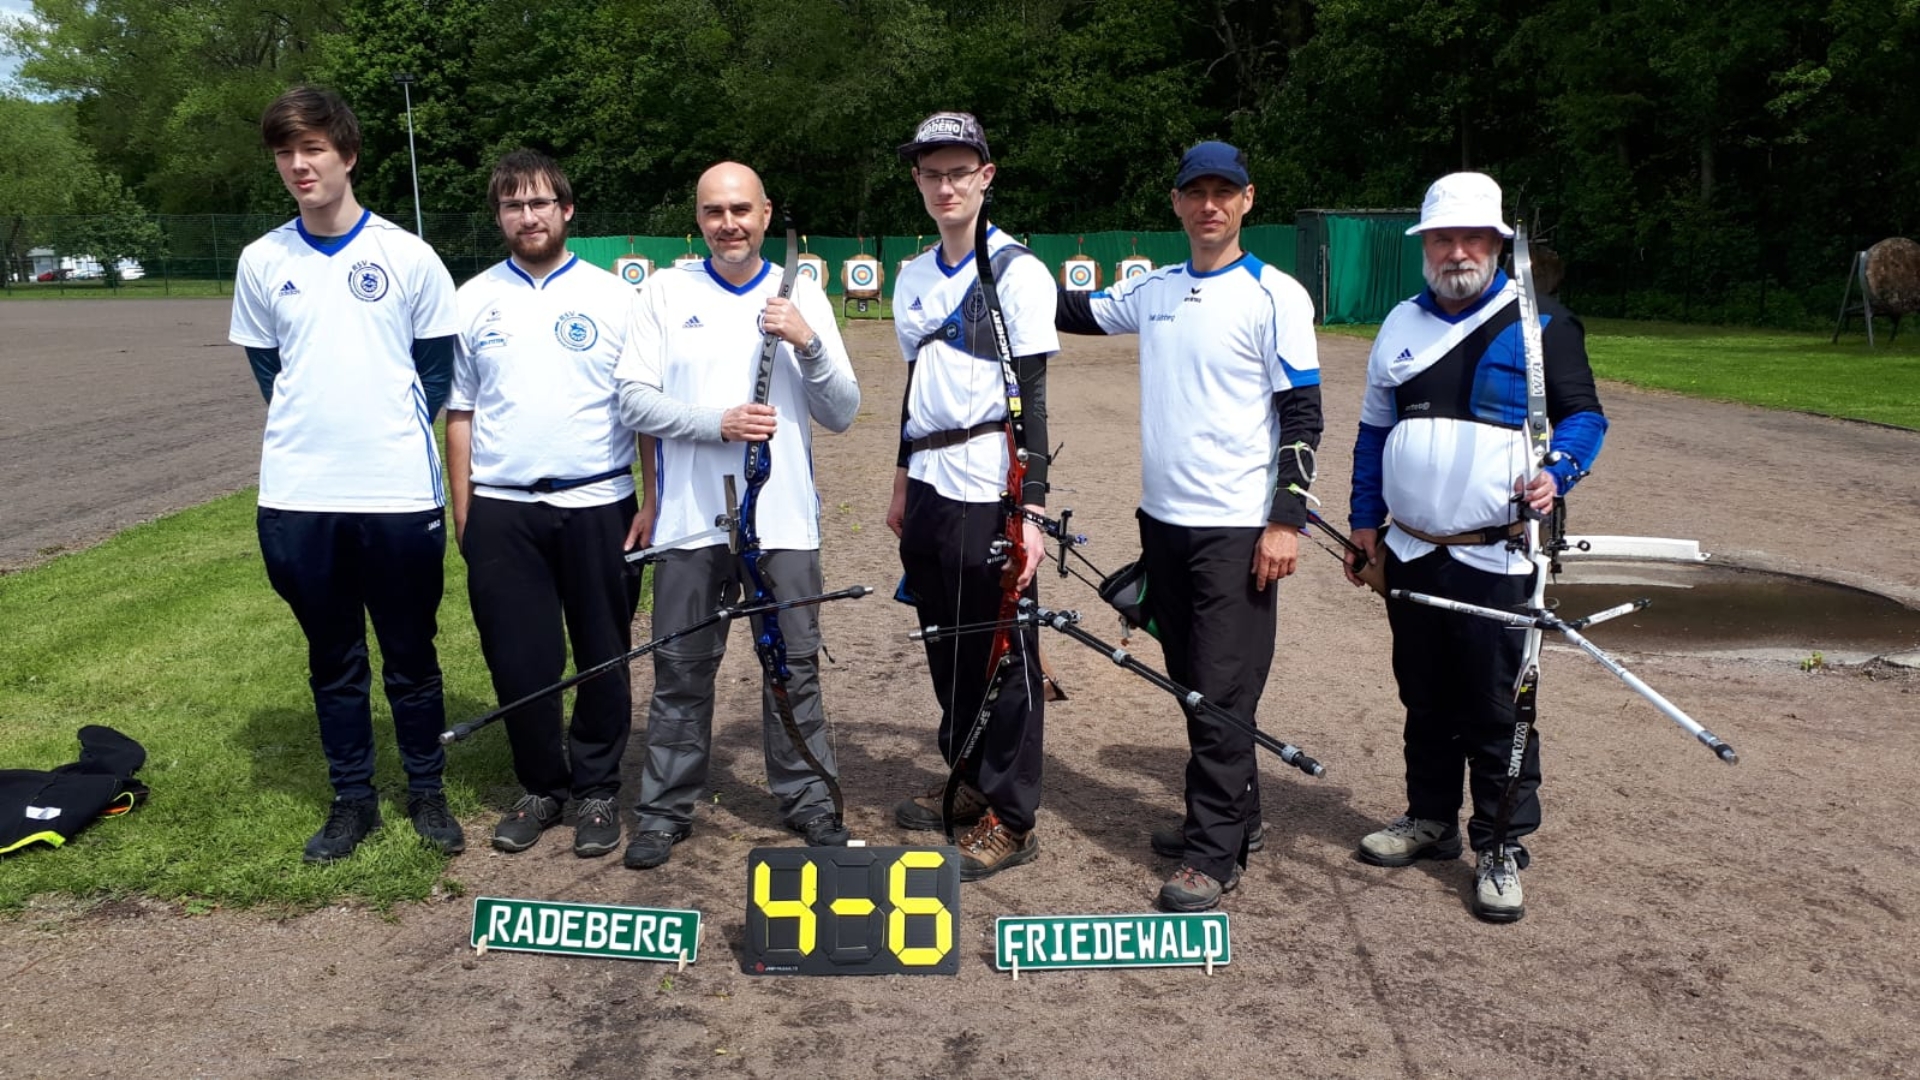 You are currently viewing Landesliga in Dresden am 02. Juni 2019